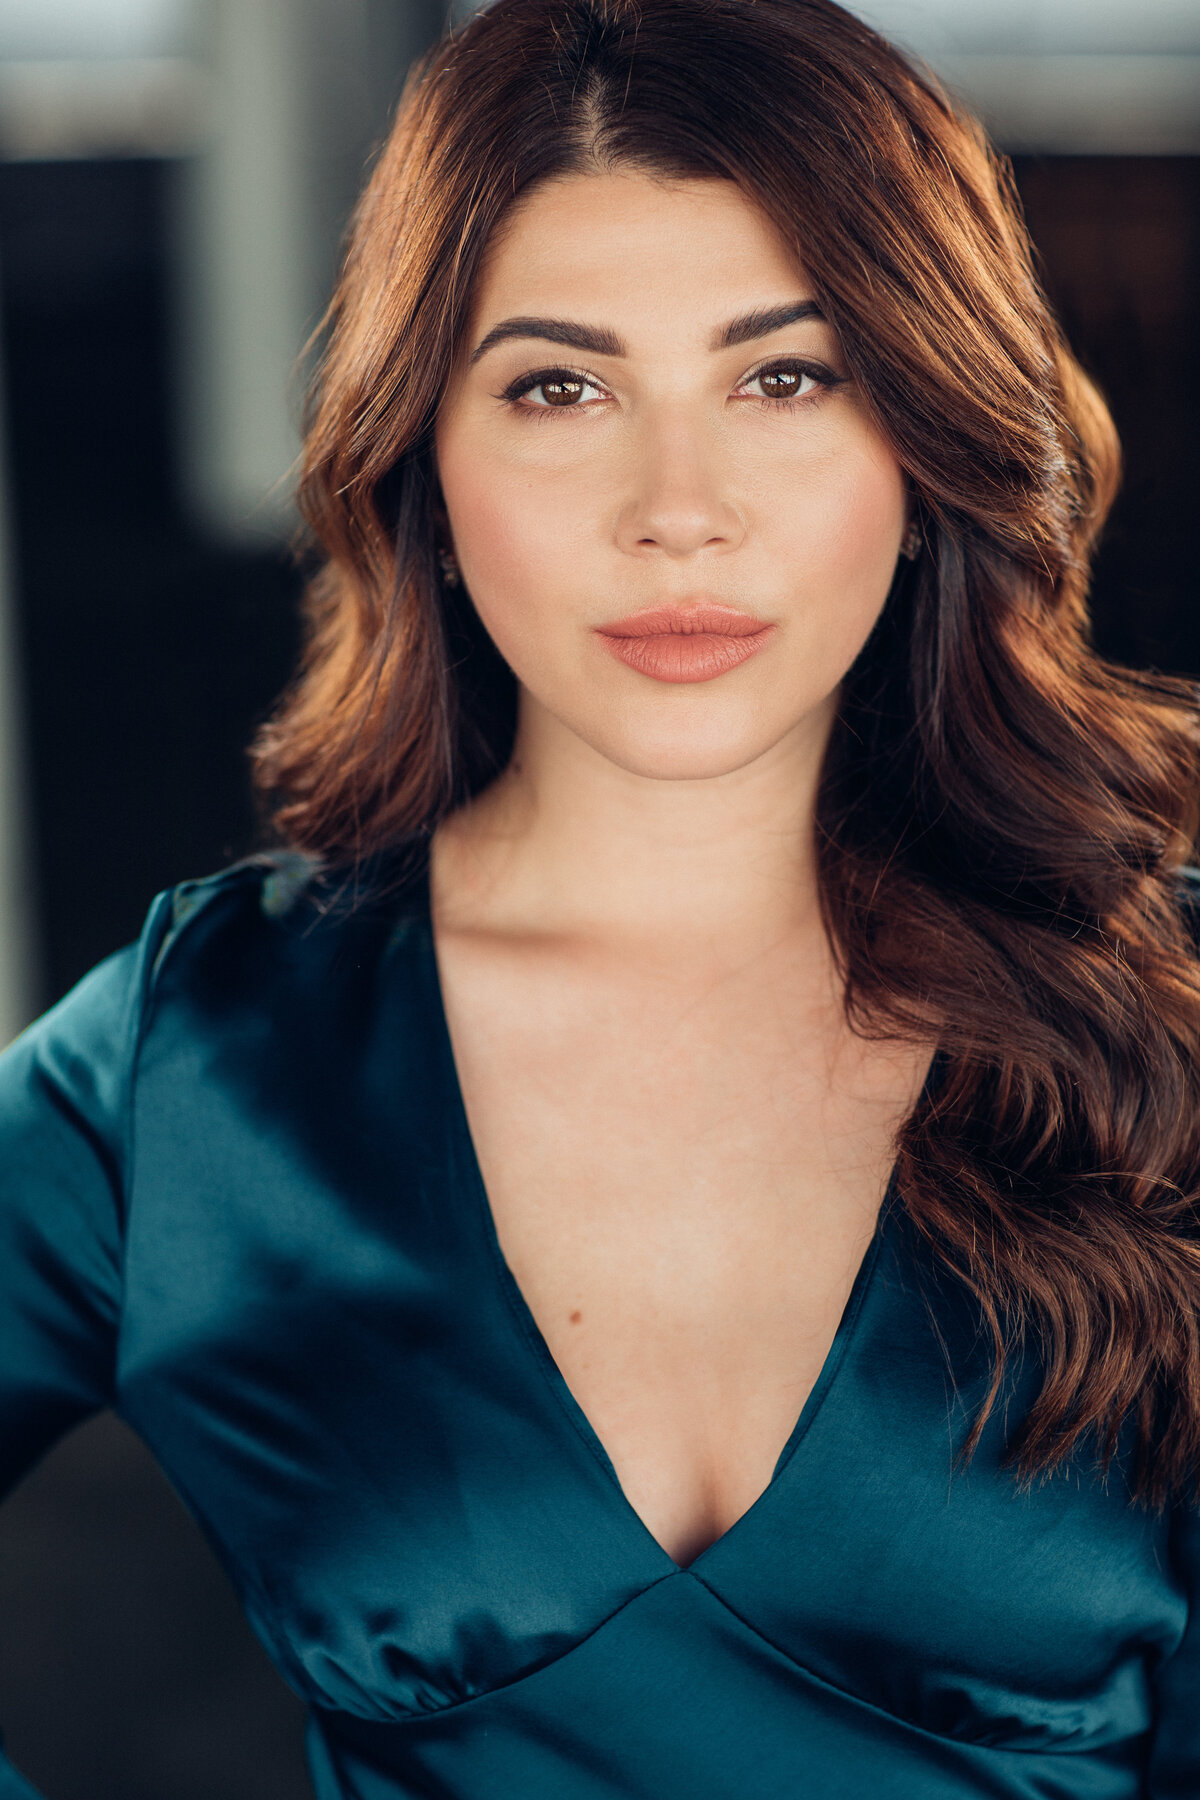 Headshot Photograph Of Young Woman In Dark Blue Blouse Los Angeles